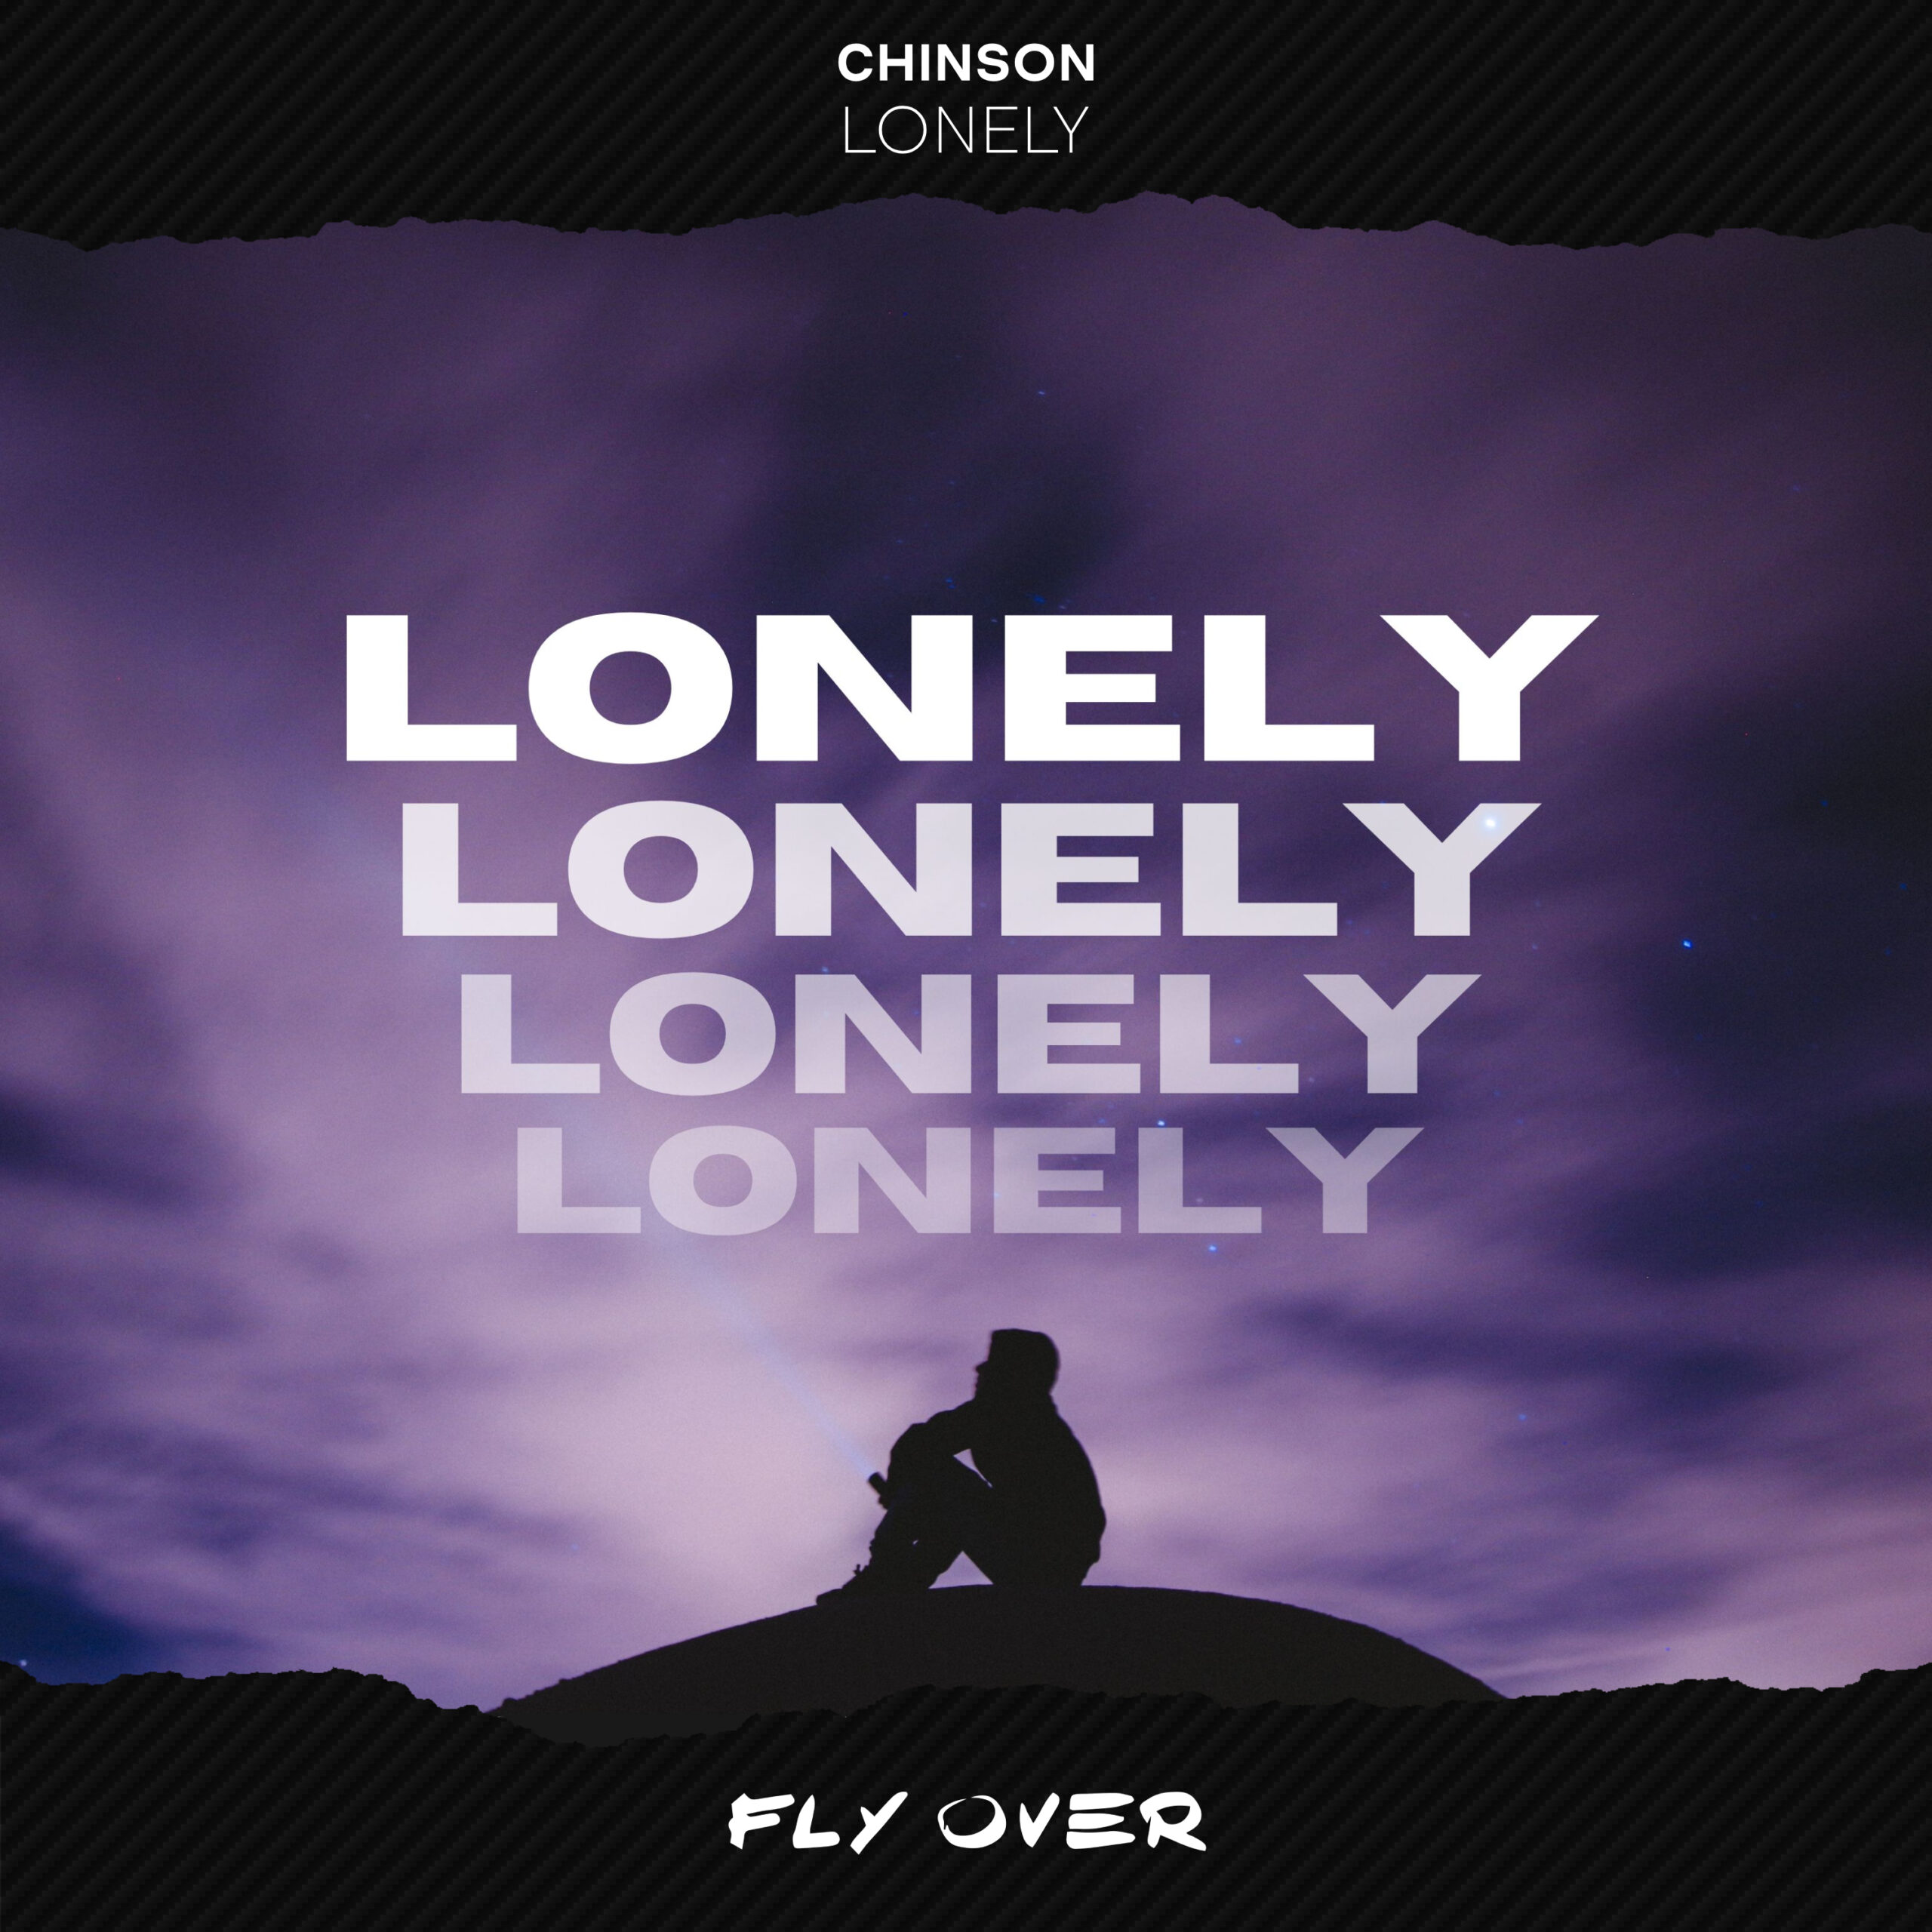 CHINSON Delivers Captivating Dance Anthem with Latest Single “Lonely”